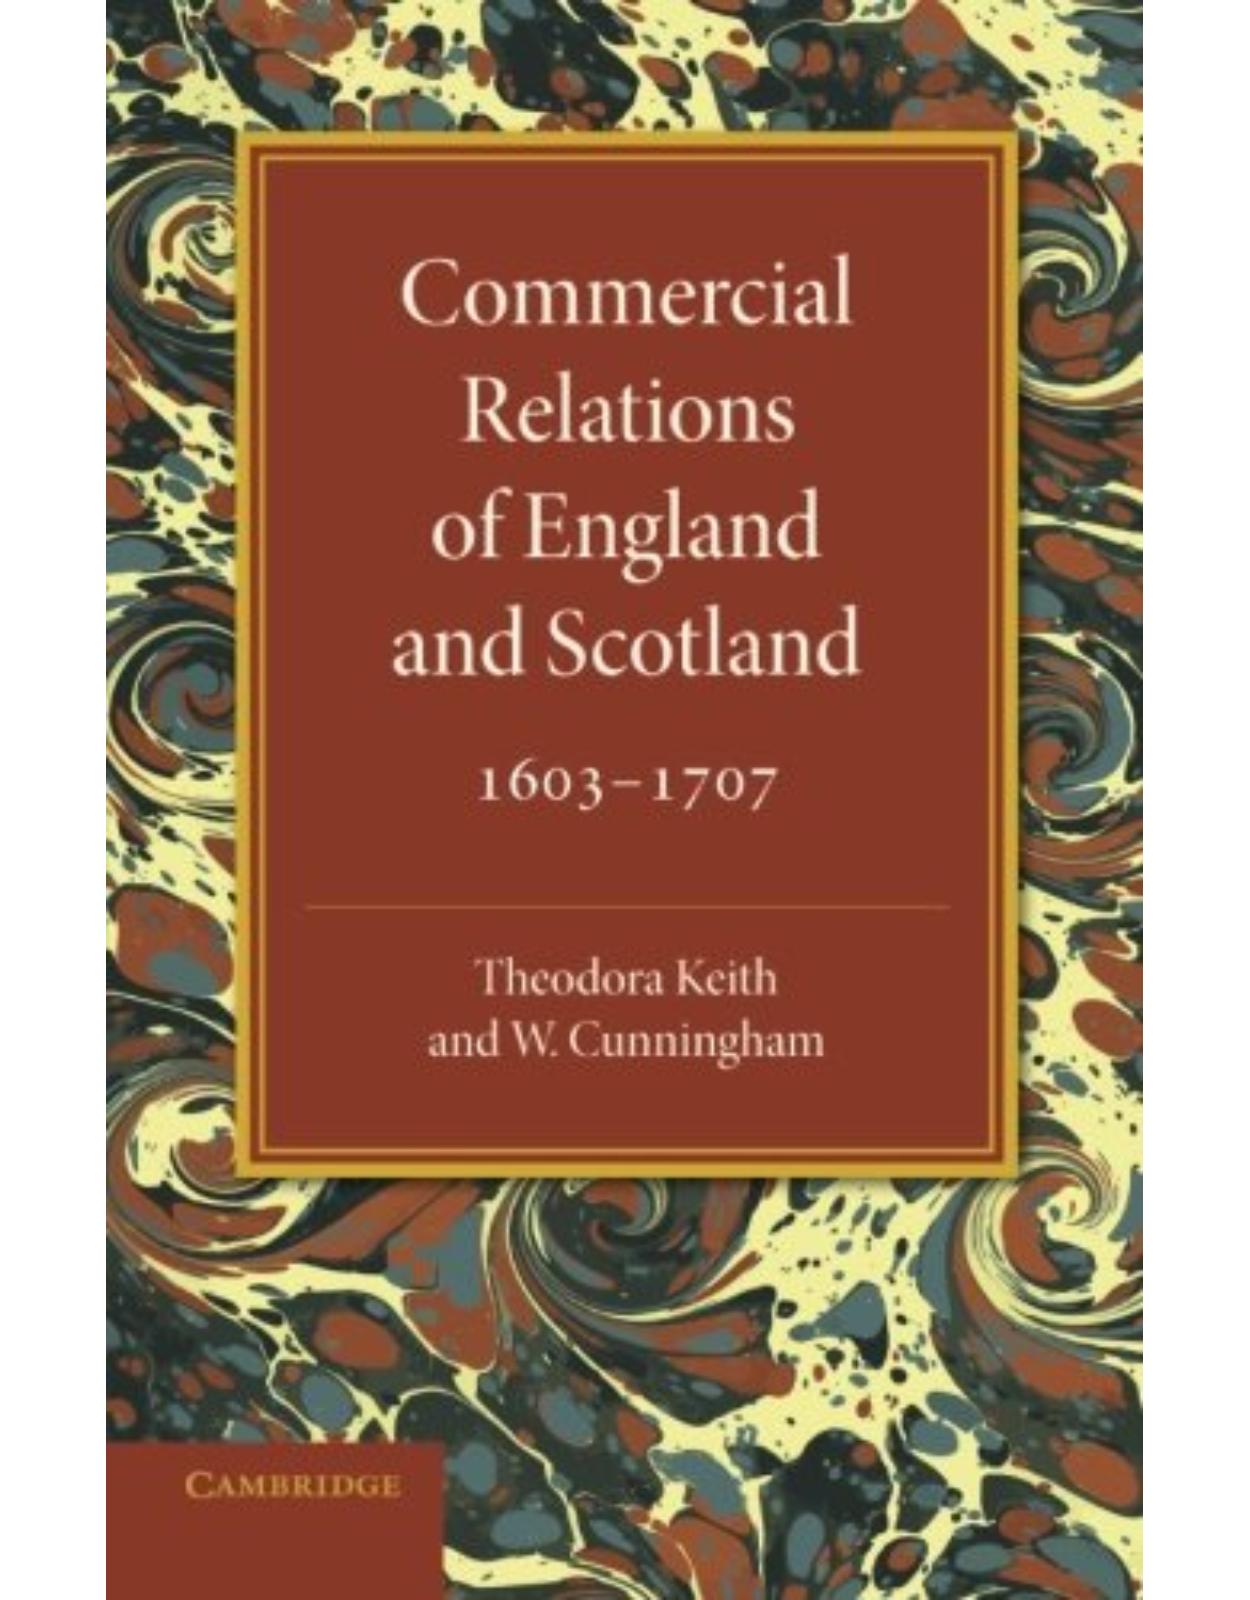 Commercial Relations of England and Scotland 1603-1707 (Girton College Studies)